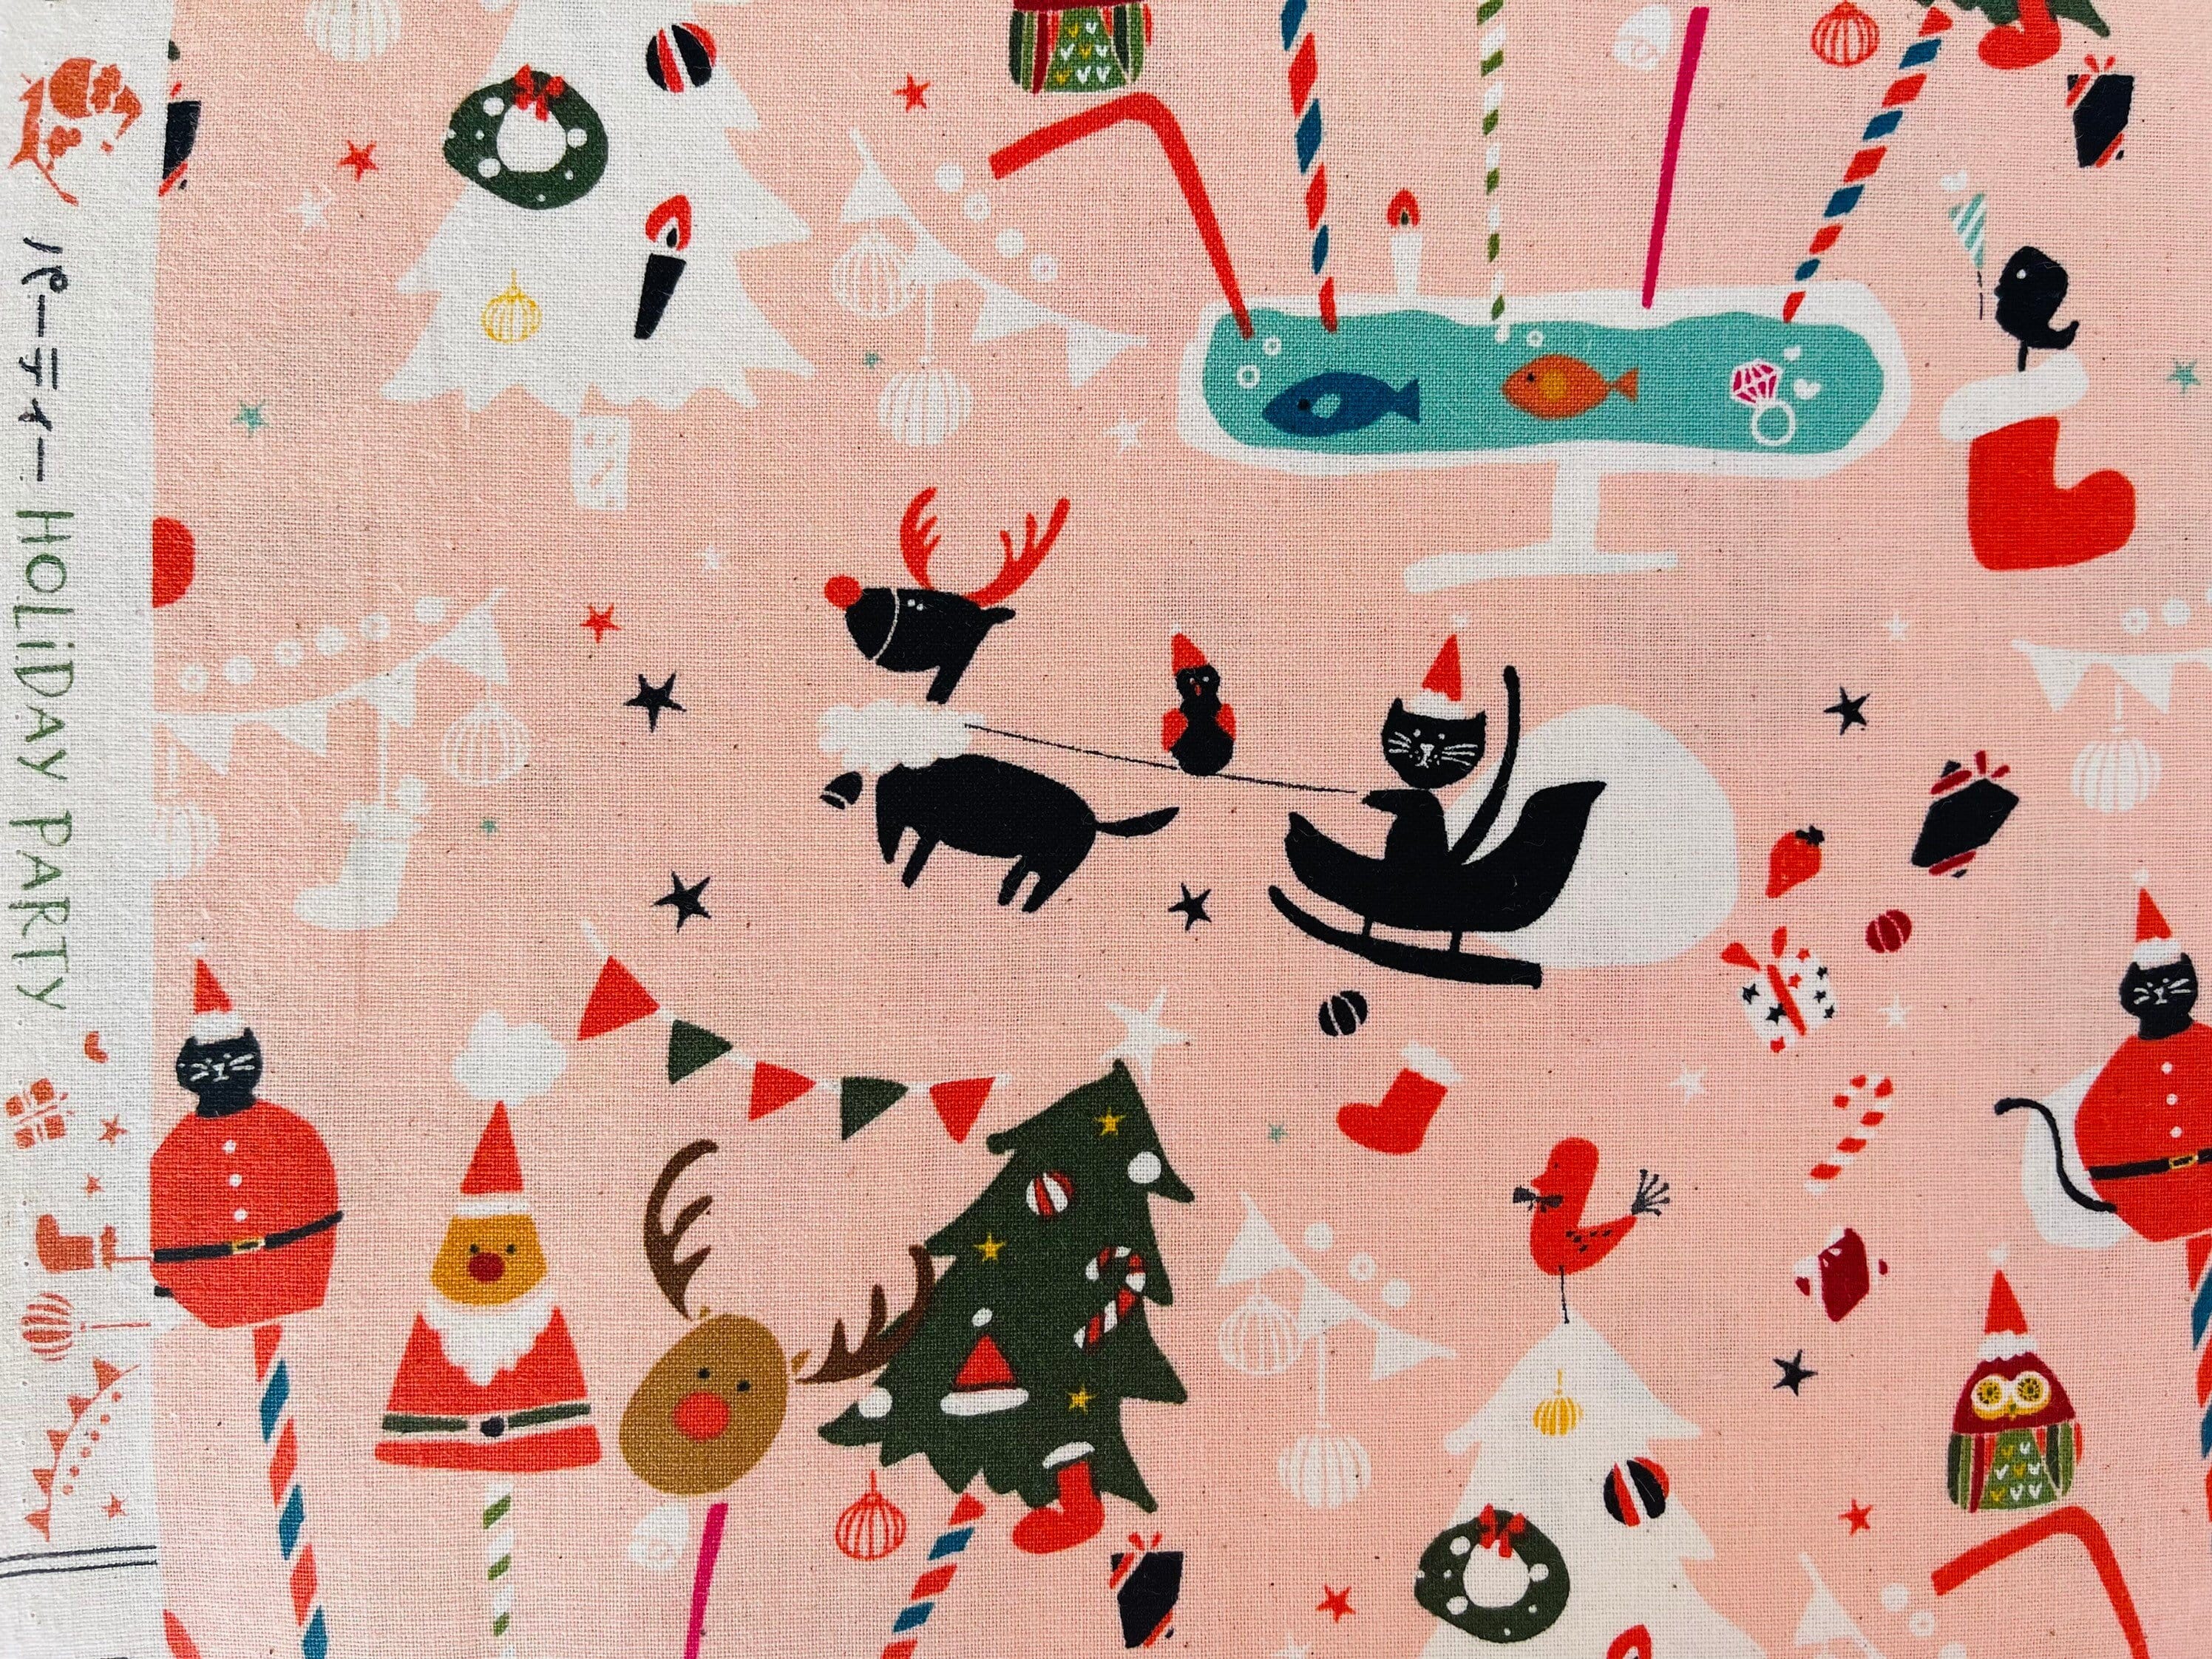 Waku Waku Christmas - Holiday Party - Pink Unbleached Fabric - Cotton+ Steel - Quilting Cotton - NM200-PI1U